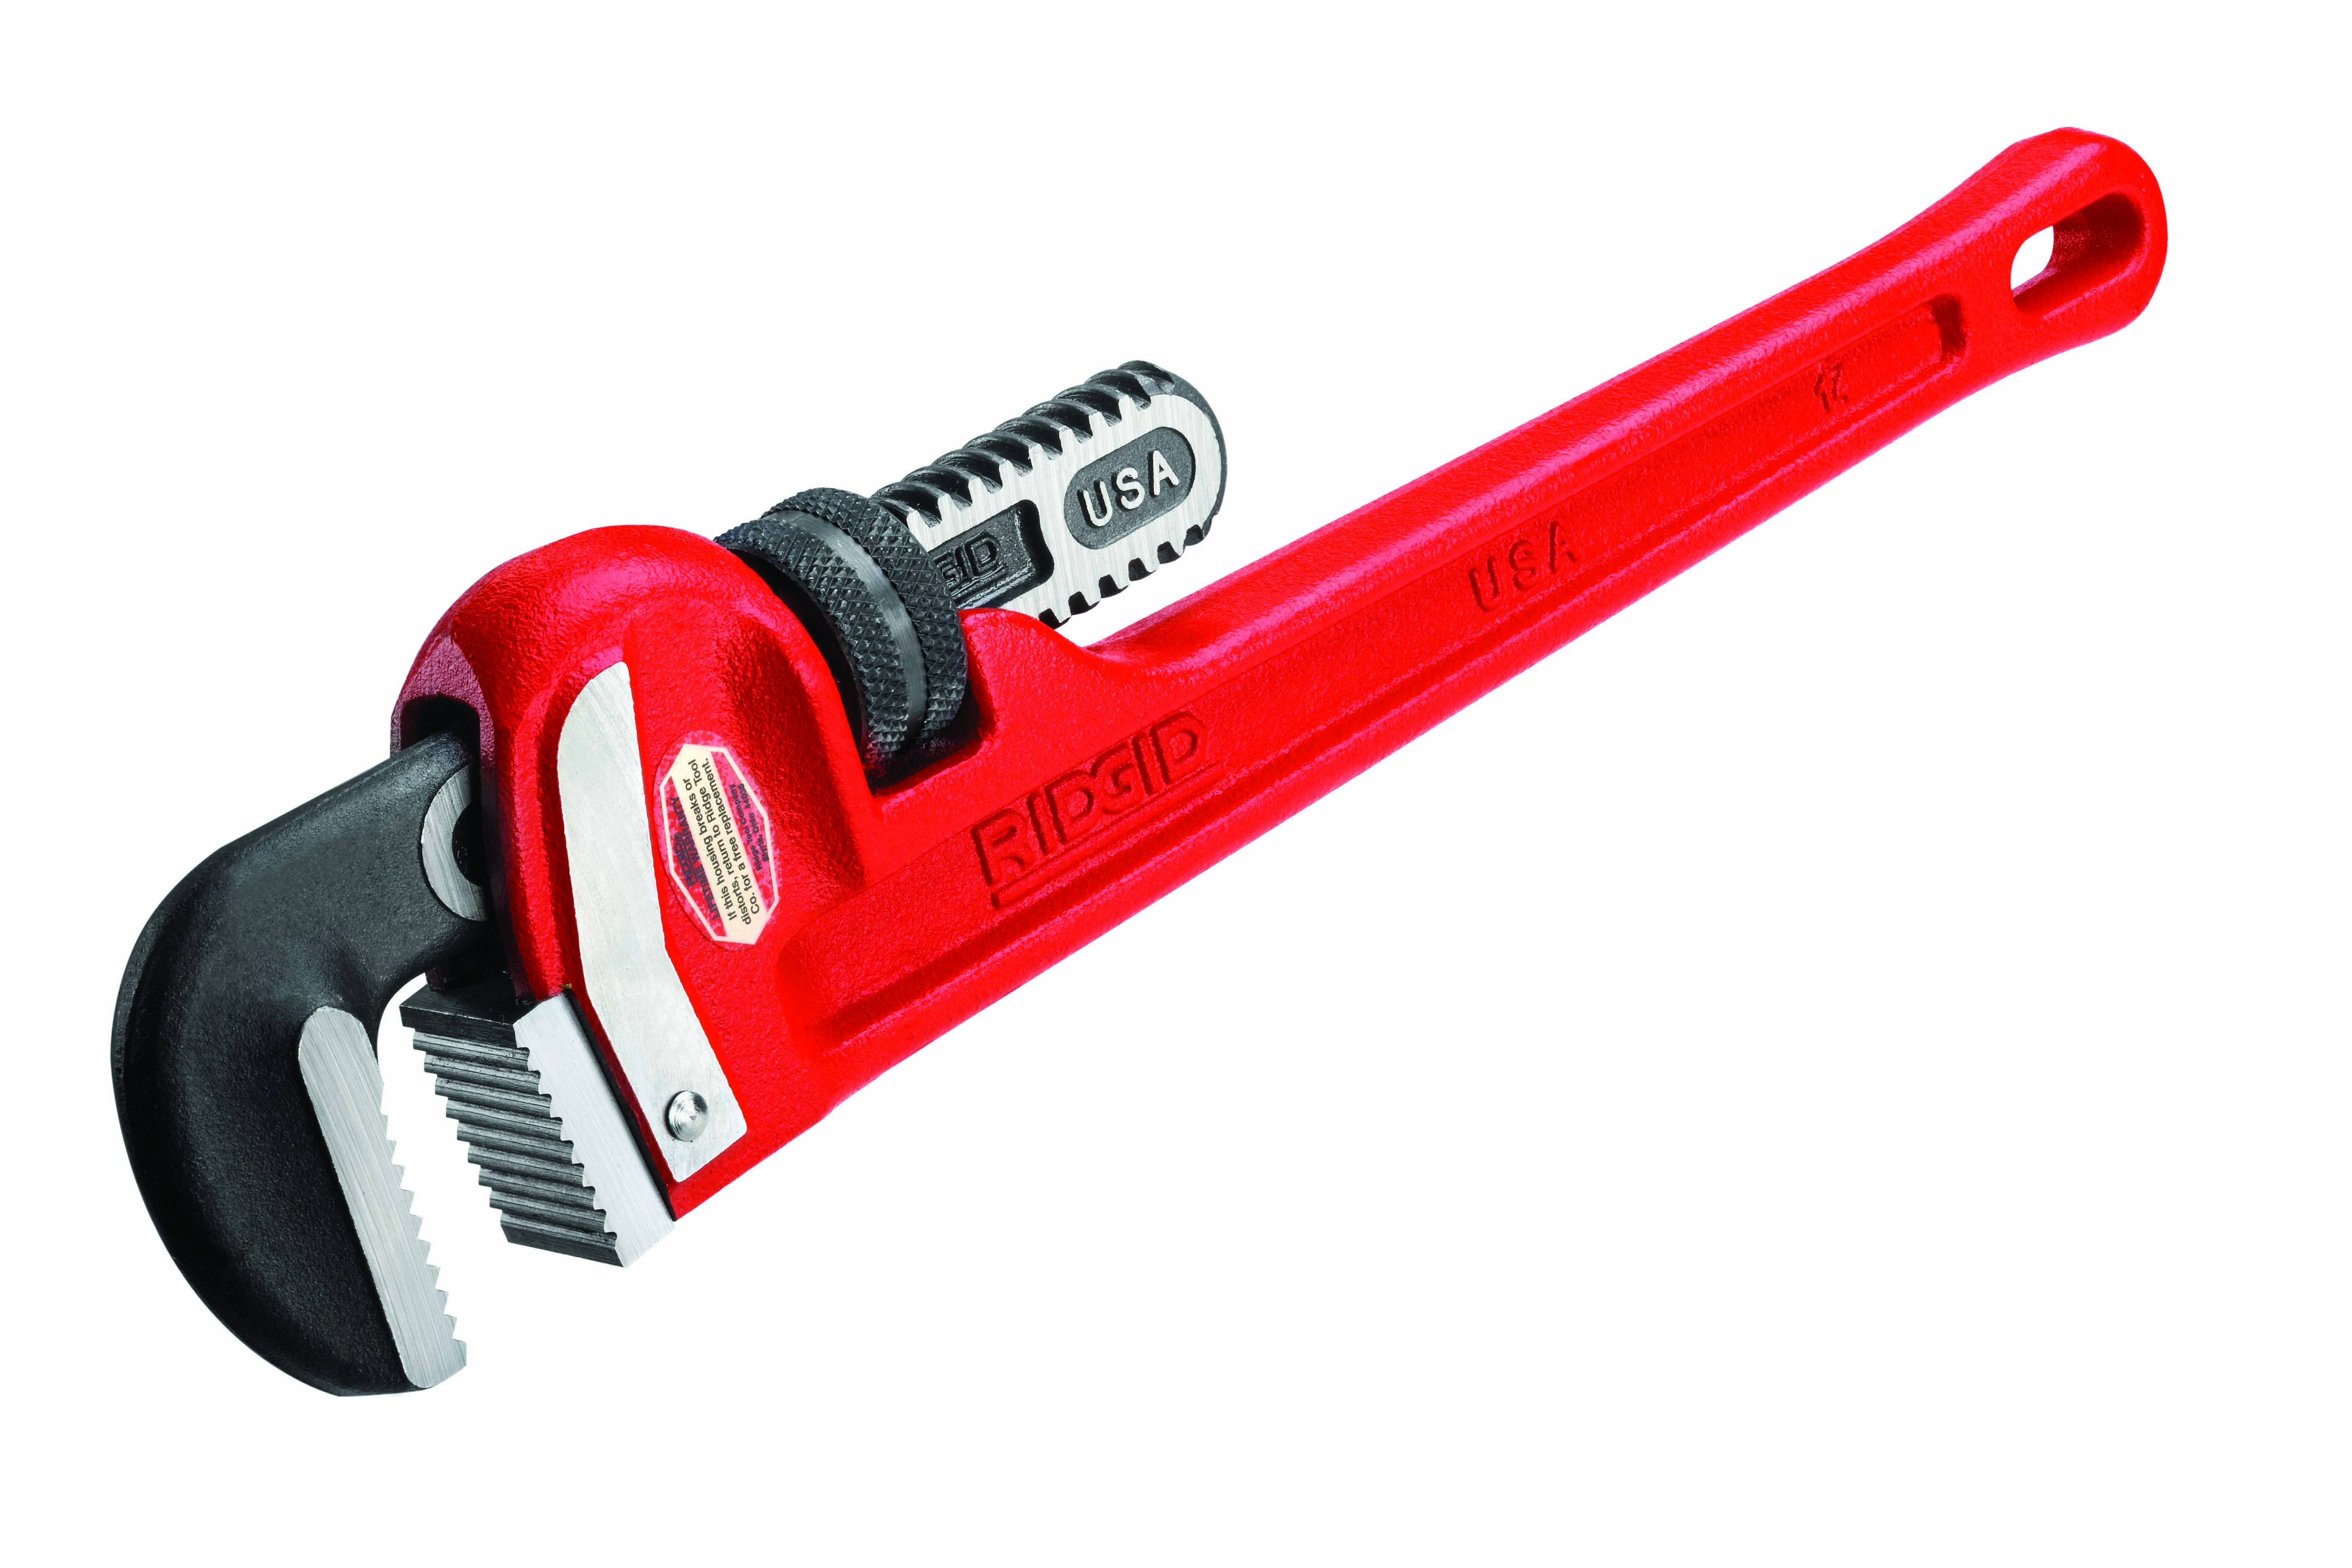 RIDGID 31020 Straight Pipe Wrench 14 Inch for sale online 